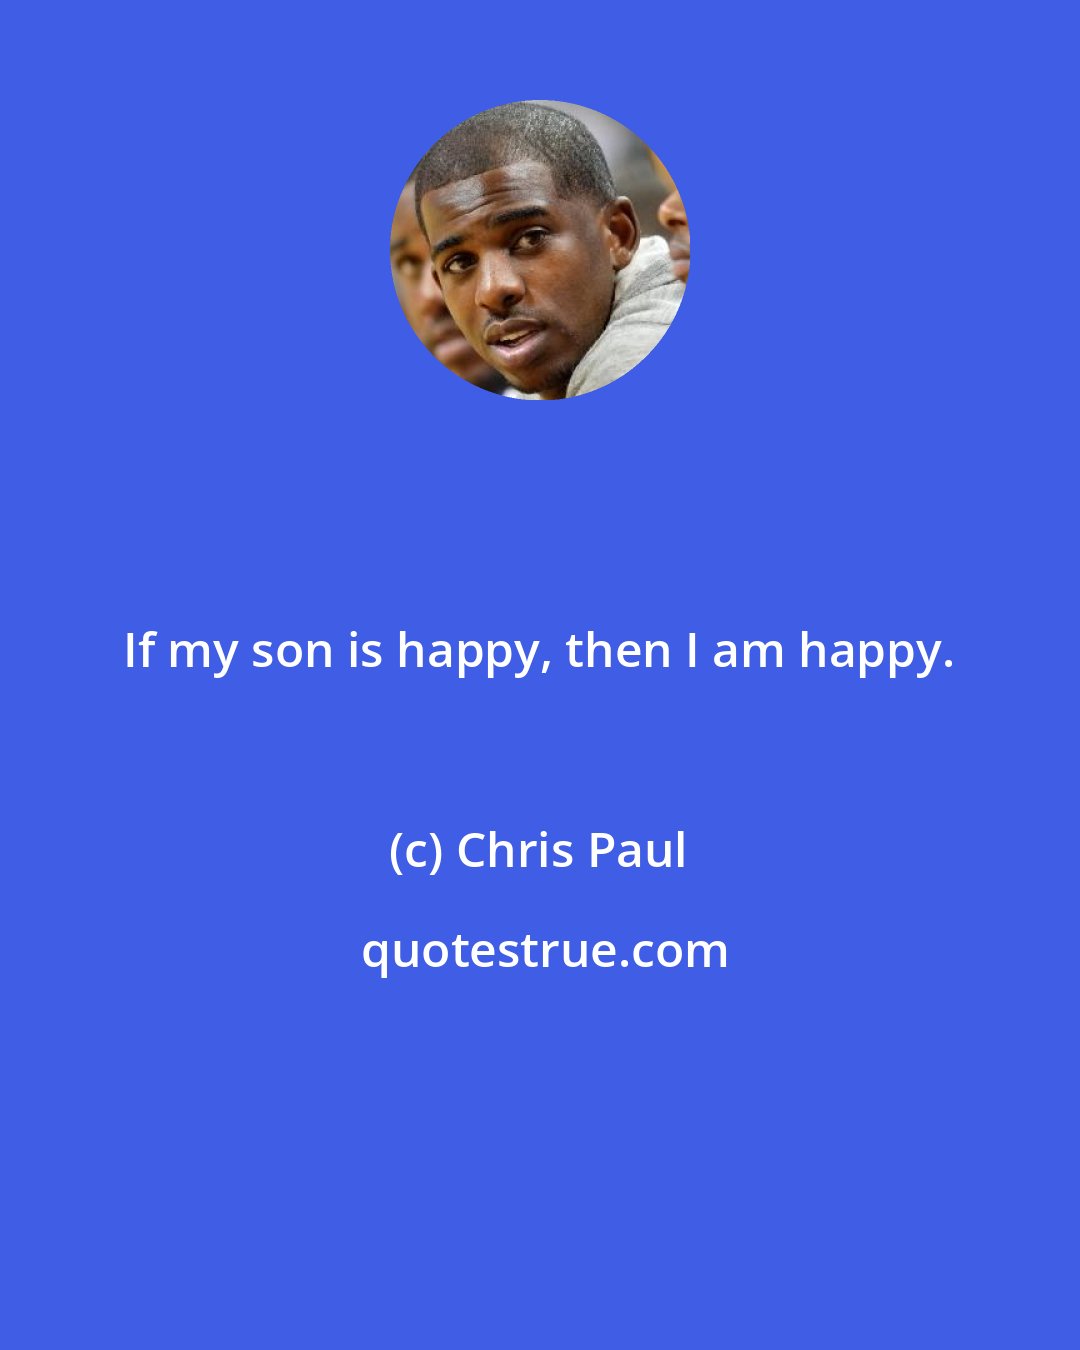 Chris Paul: If my son is happy, then I am happy.